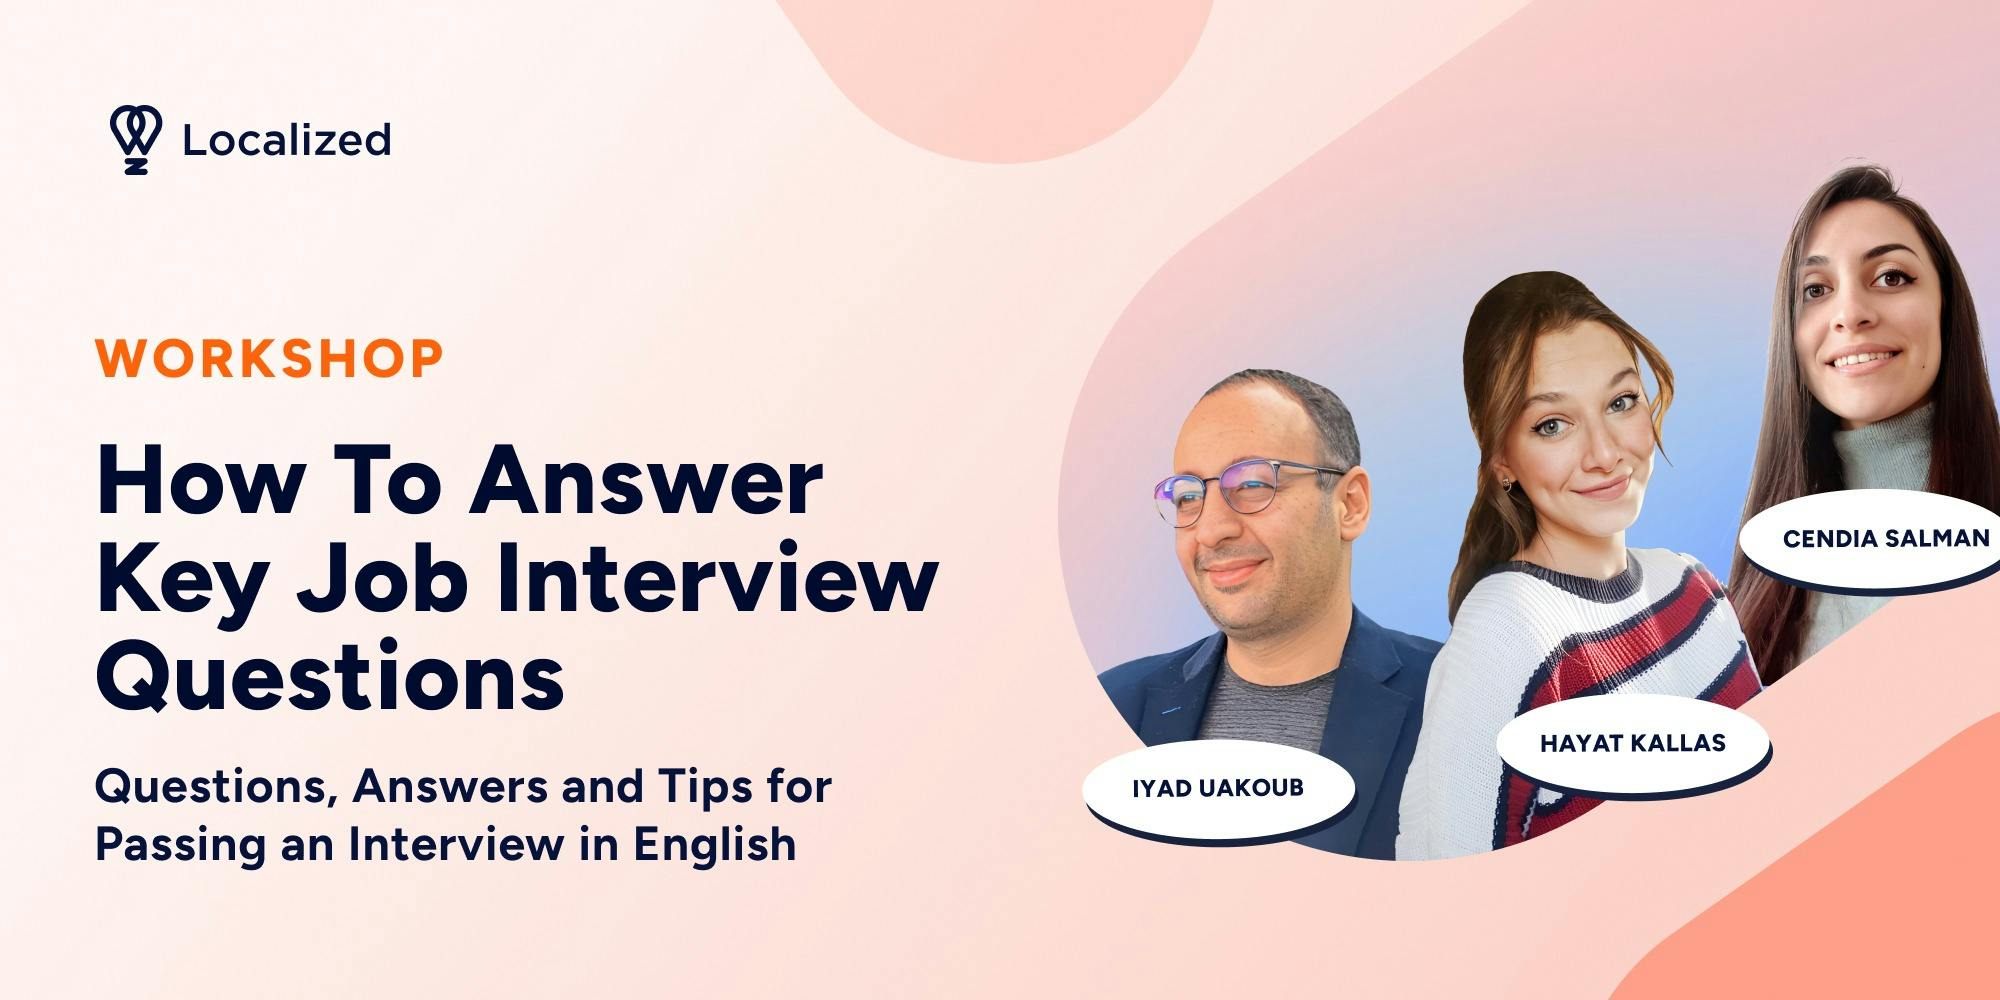 Workshop: How To Answer Key Job Interview Questions - Questions, Answers and Tips for Passing an Interview in English